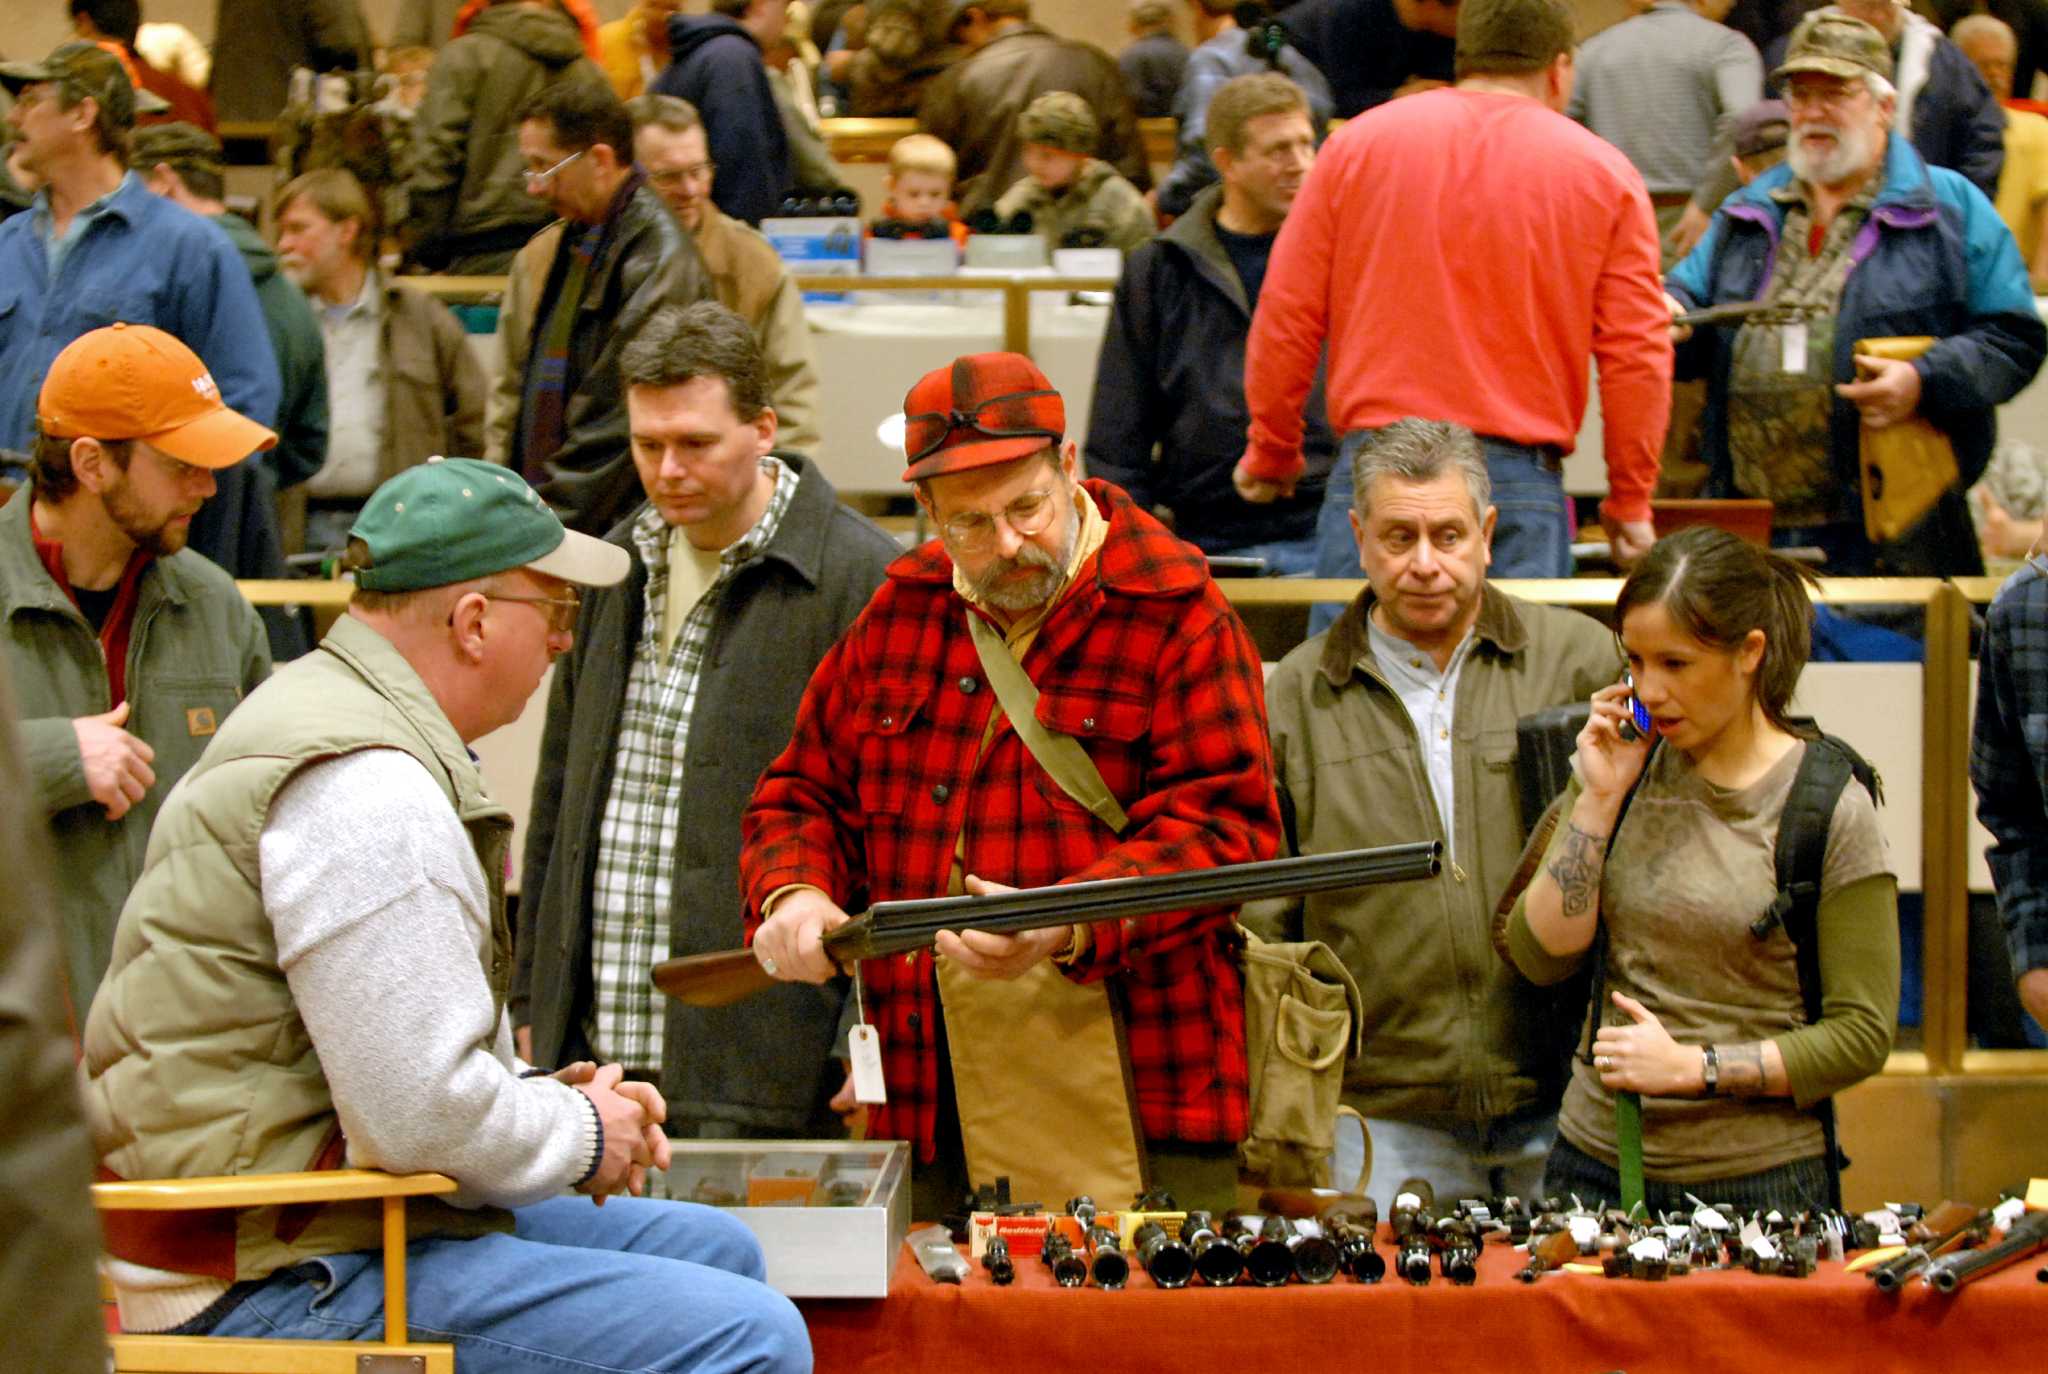 Albany gun show expects big draw